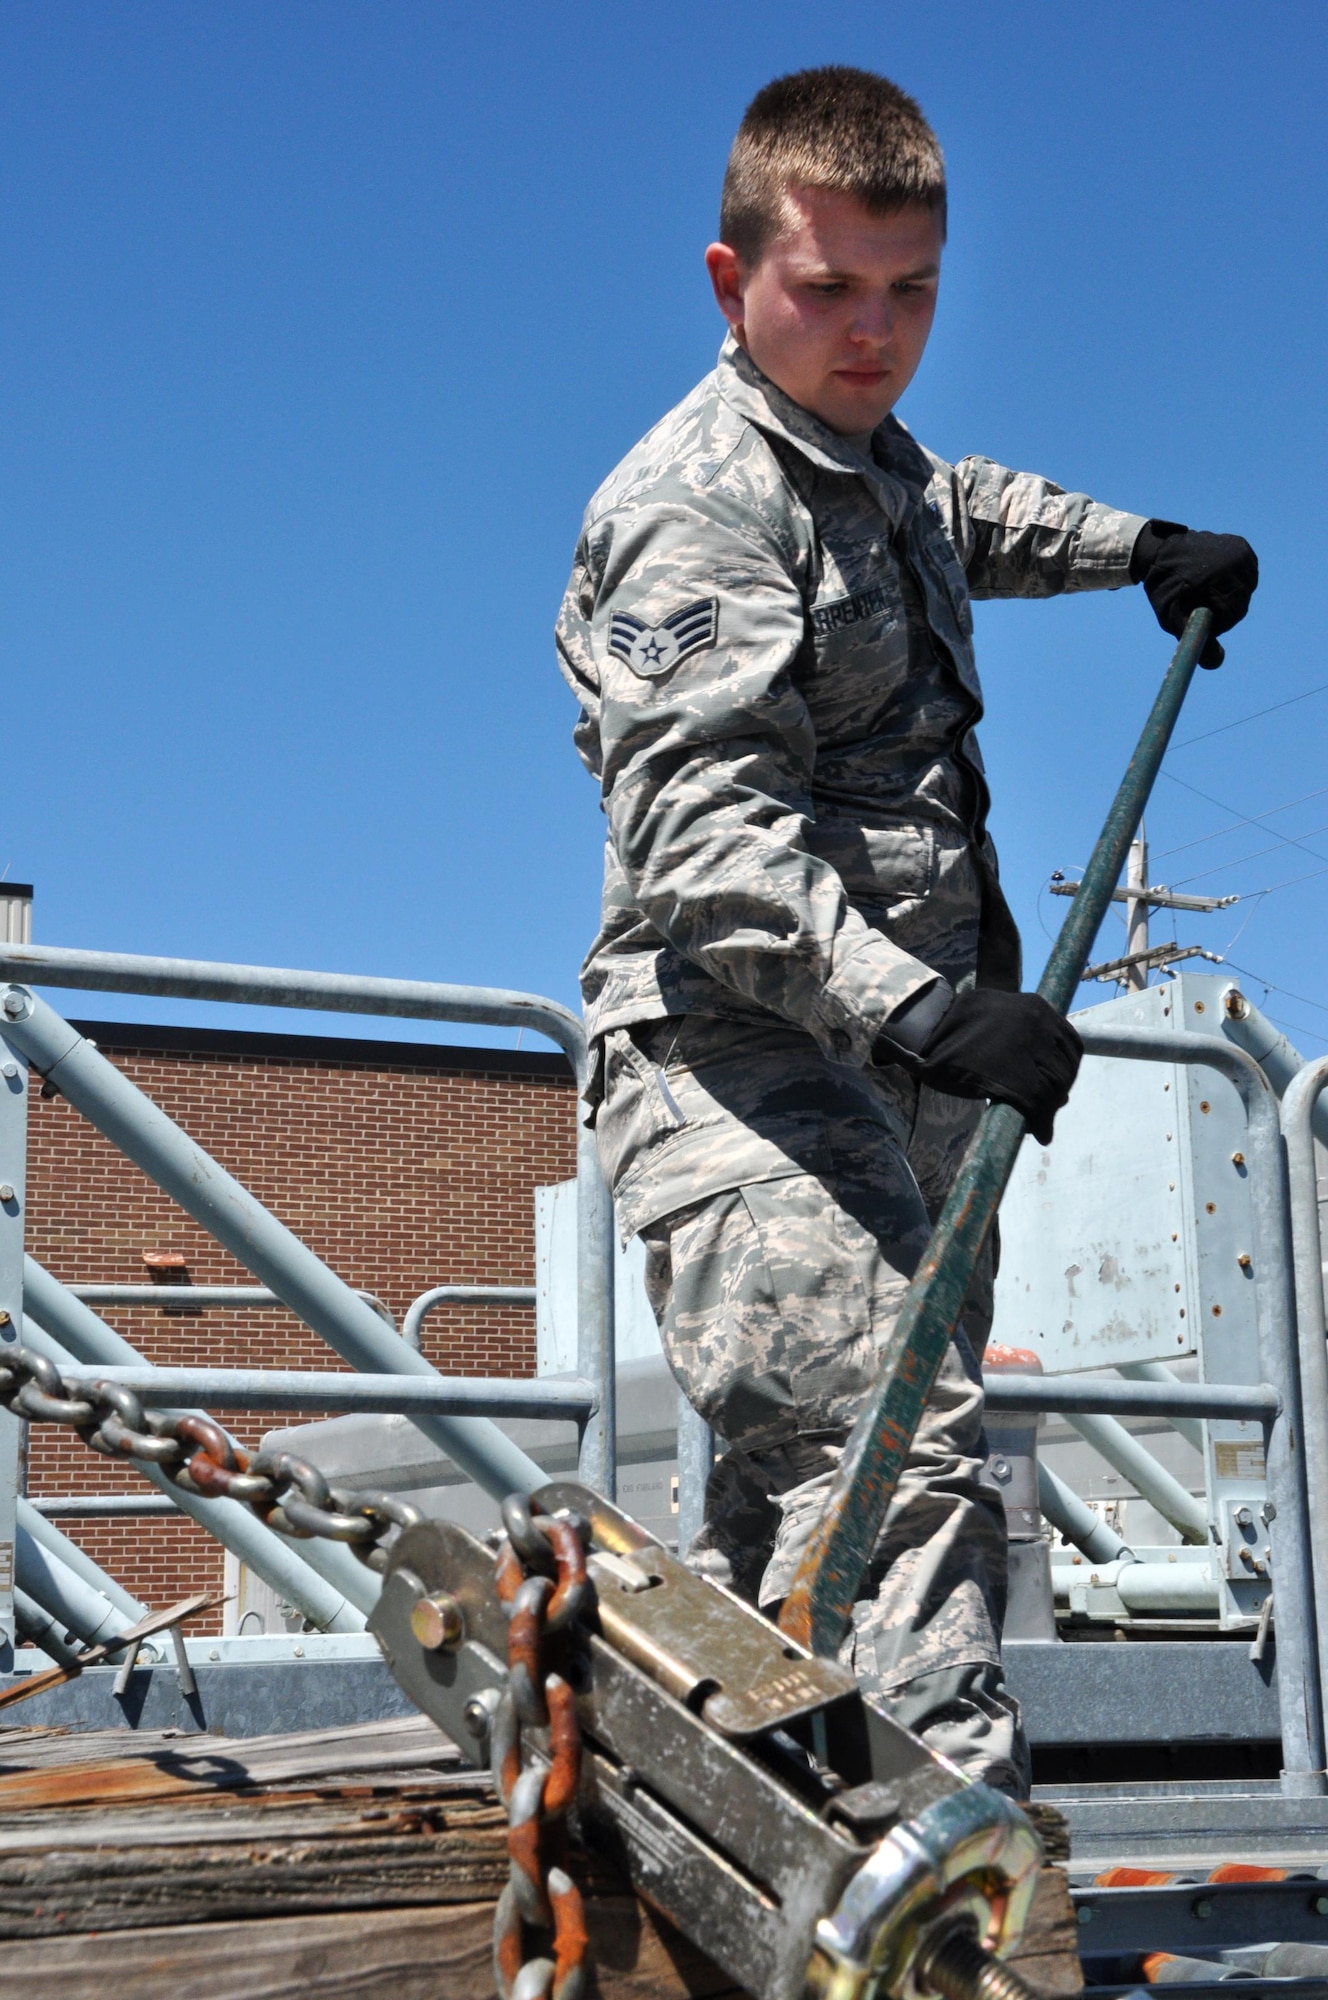 Senior Airman Daniel Carpenter, 80th Aerial Port Squadron air transportation journeyman, uses a tool to unjam an obstruction on a track on a loading dock April 3, 2016 at Dobbins Air Reserve Base. Carpenter was accepted into the Air Force Academy and will start training in July 2016.